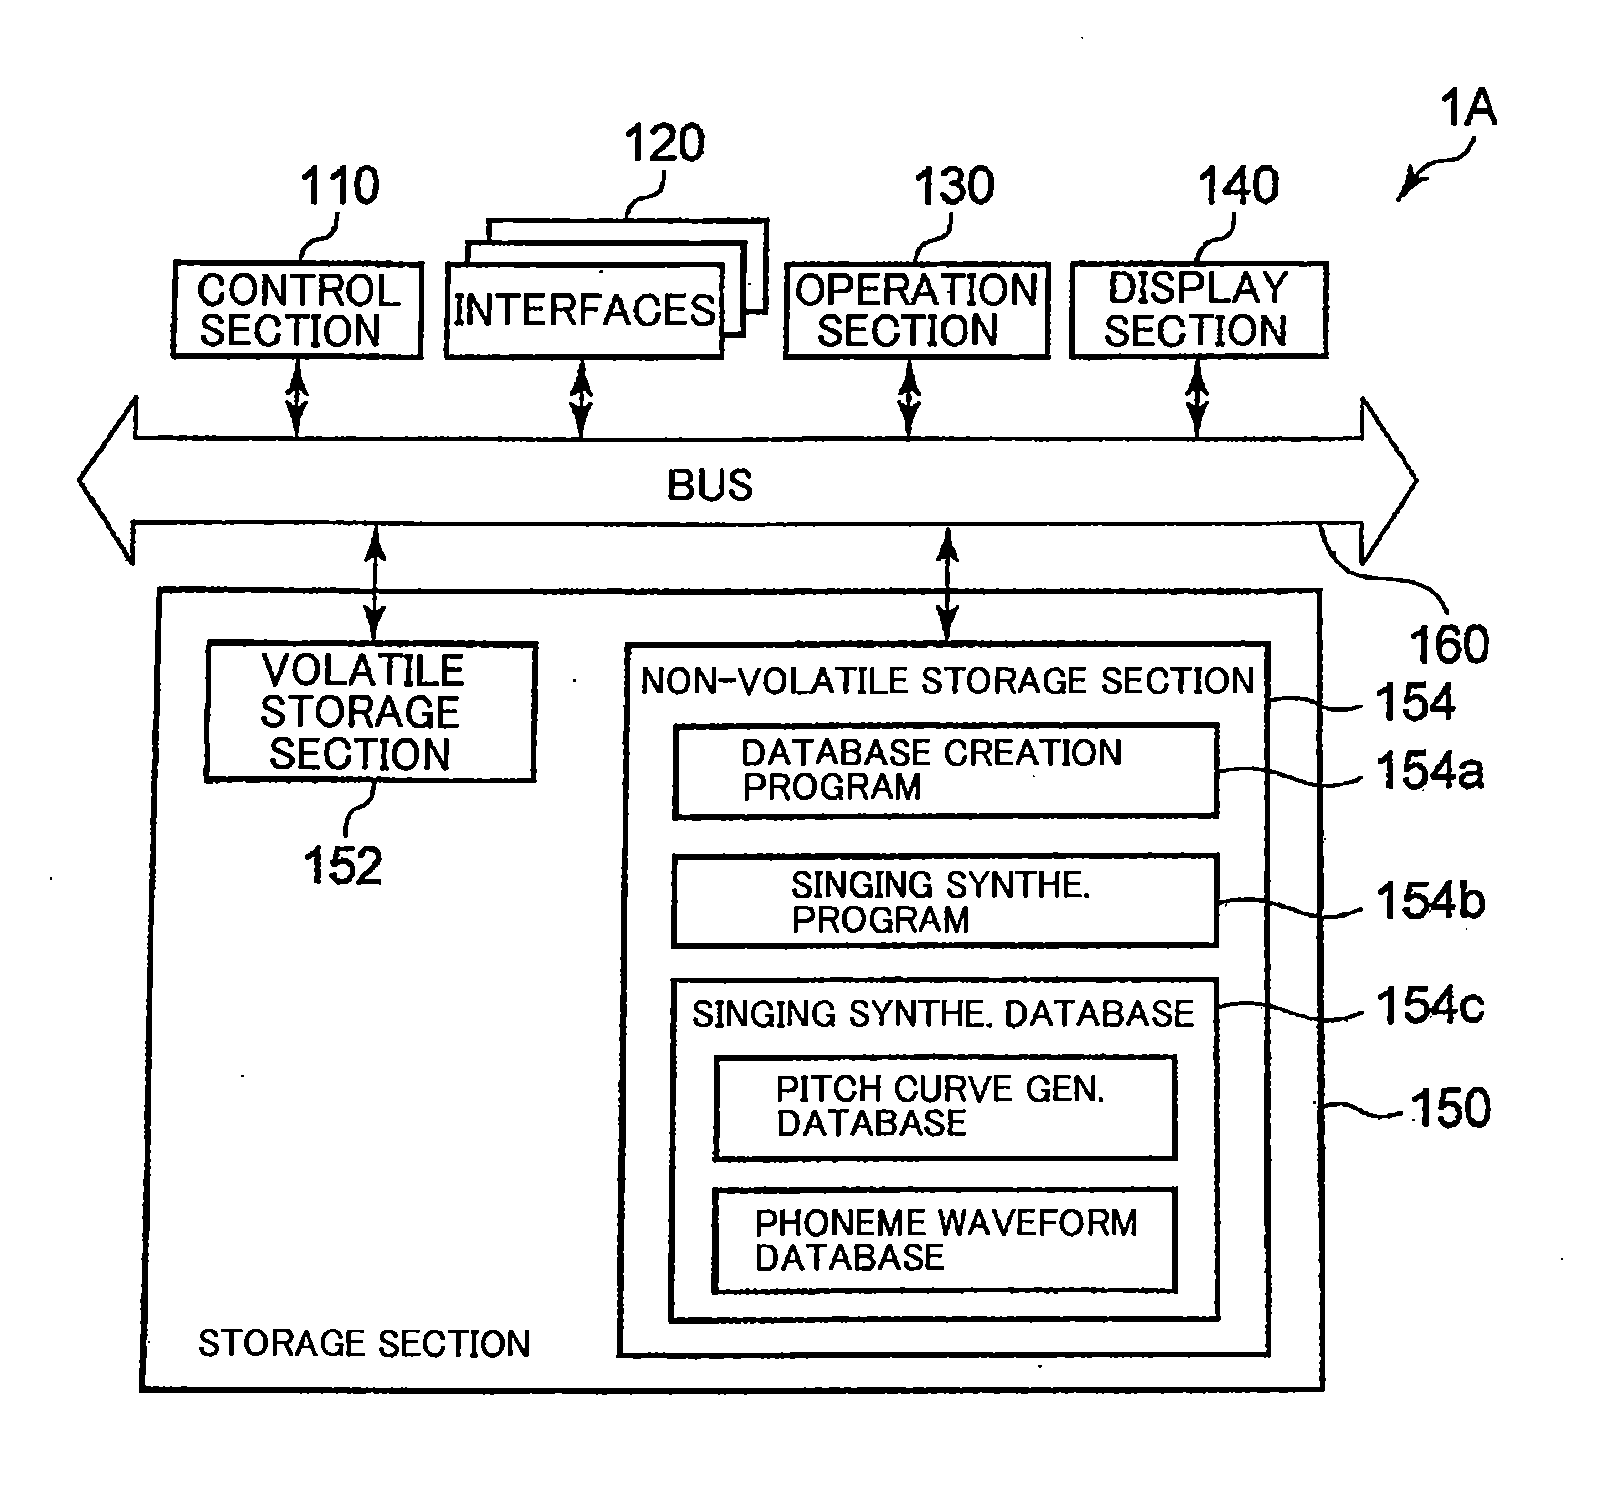 Apparatus and Method for Creating Singing Synthesizing Database, and Pitch Curve Generation Apparatus and Method